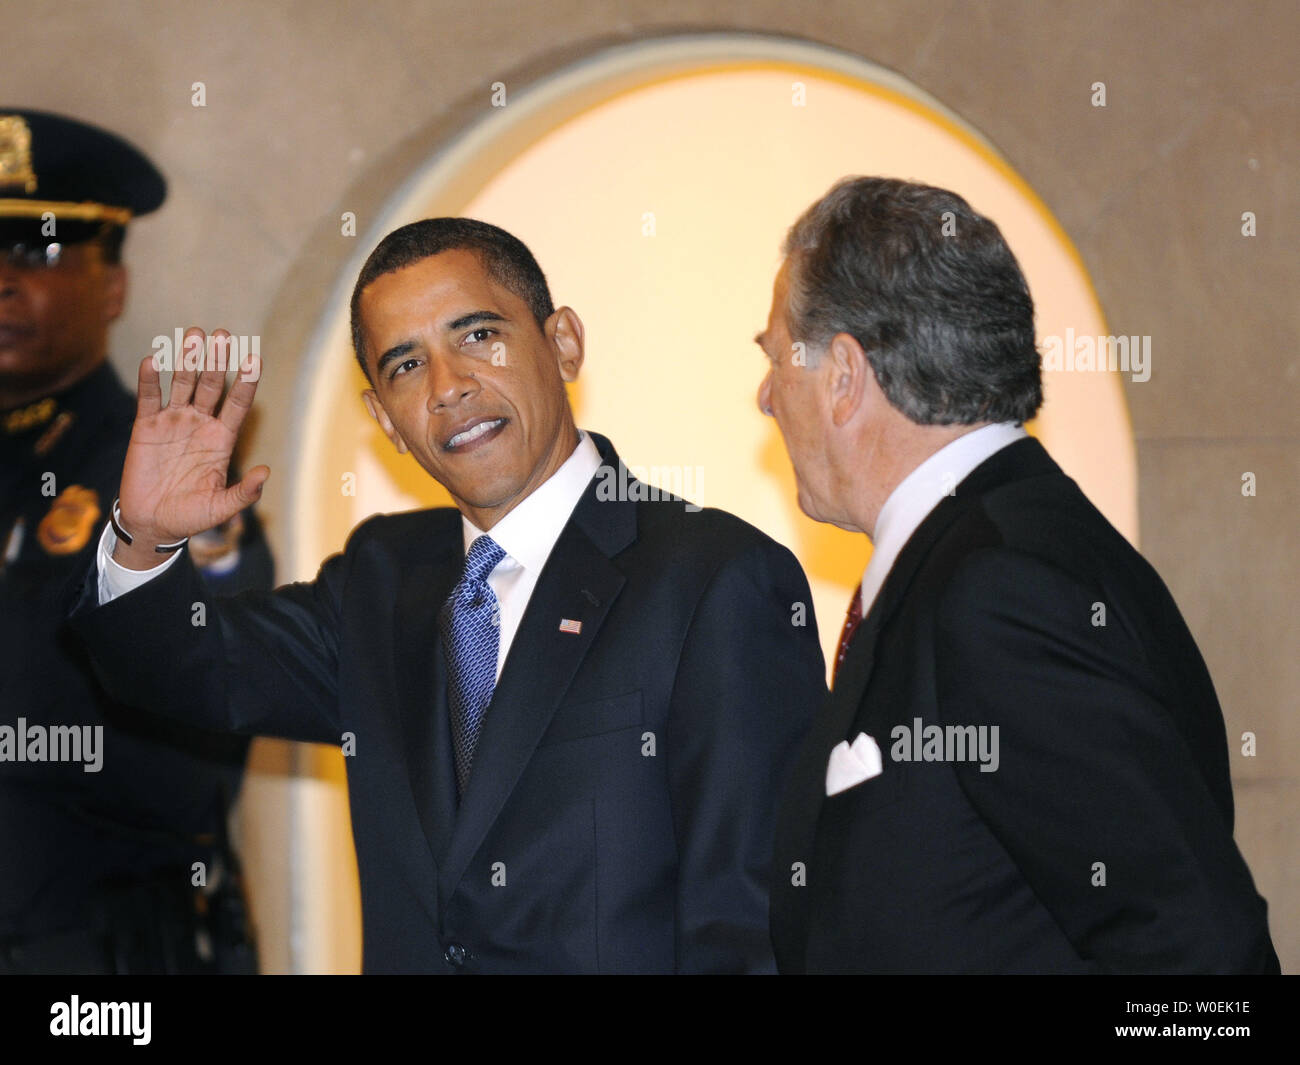 President-elect Barack Obama waves as he leaves a meeting with Speaker of the House Nancy Pelosi (D-CA) in the U.S. Capitol Building in Washington on January 5, 2008. (UPI Photo/Kevin Dietsch) Stock Photo